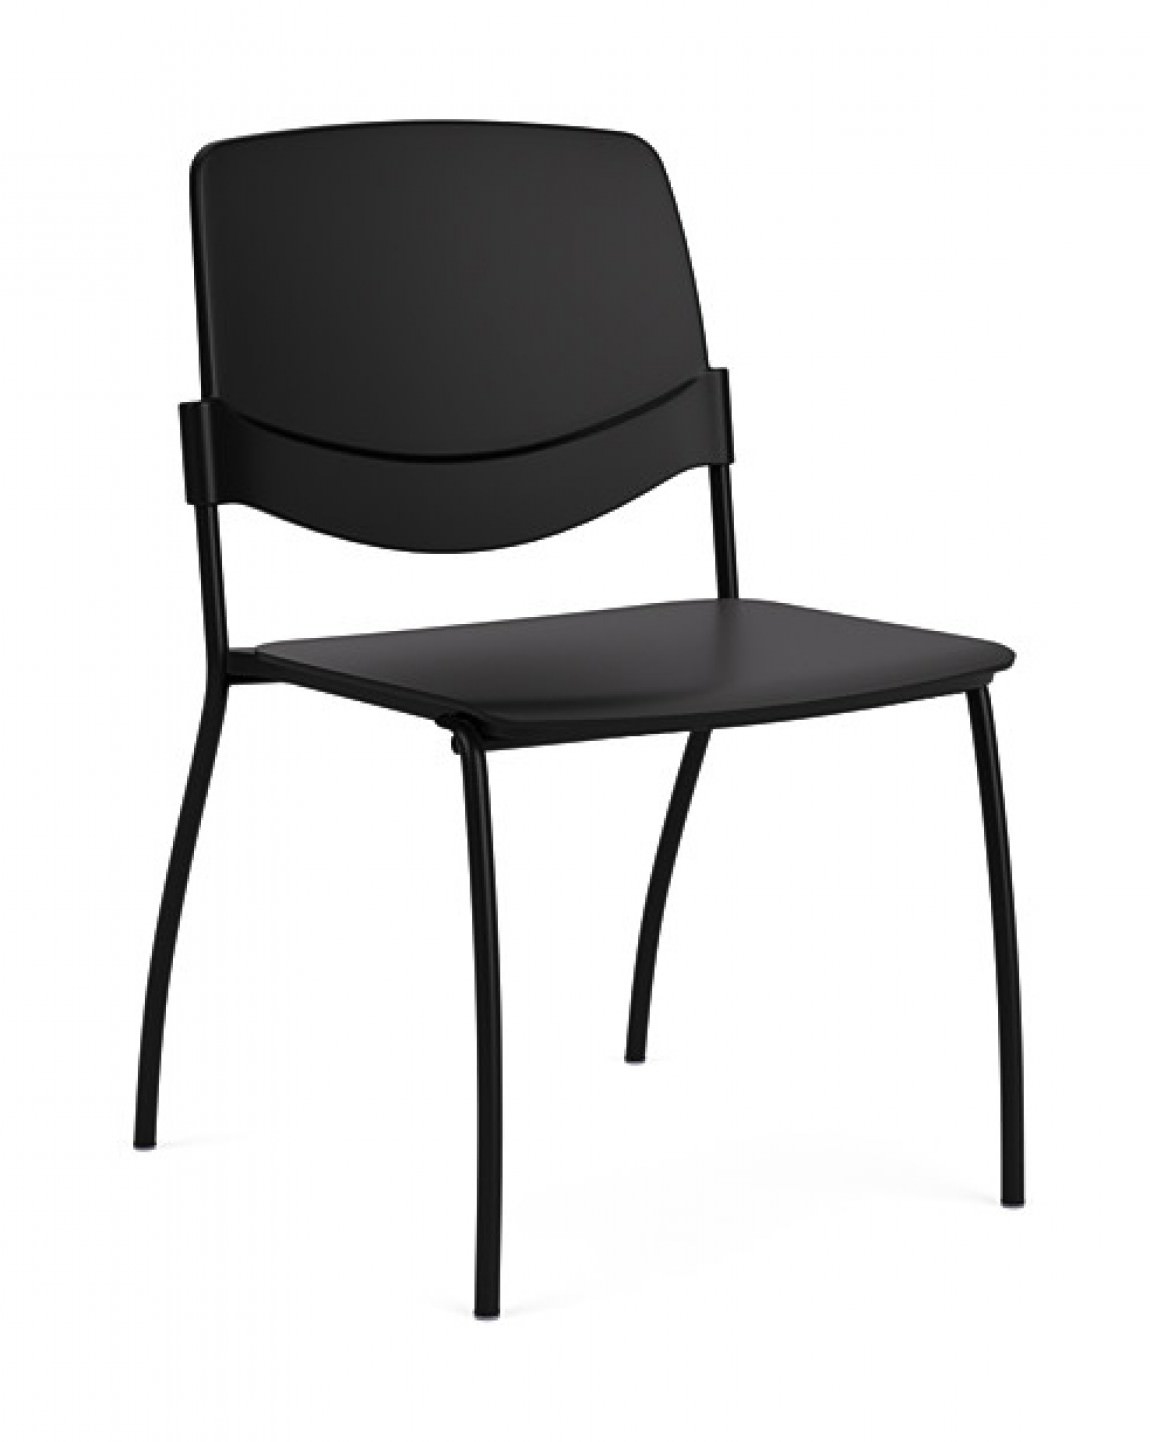 Set of Stackable Guest Chairs